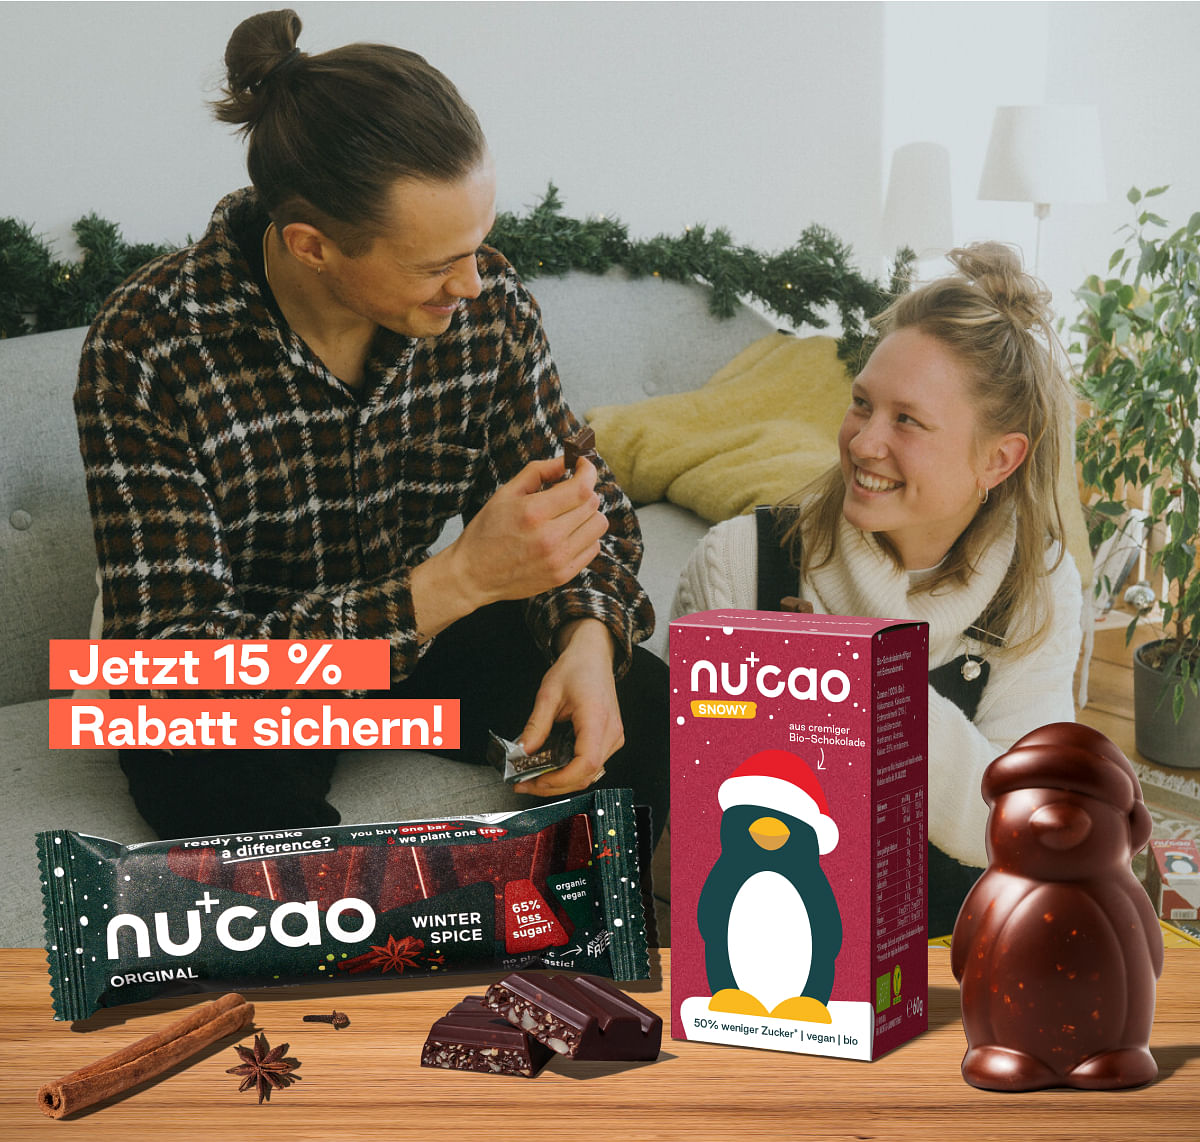 The nu company: Weihnachtsaktion!